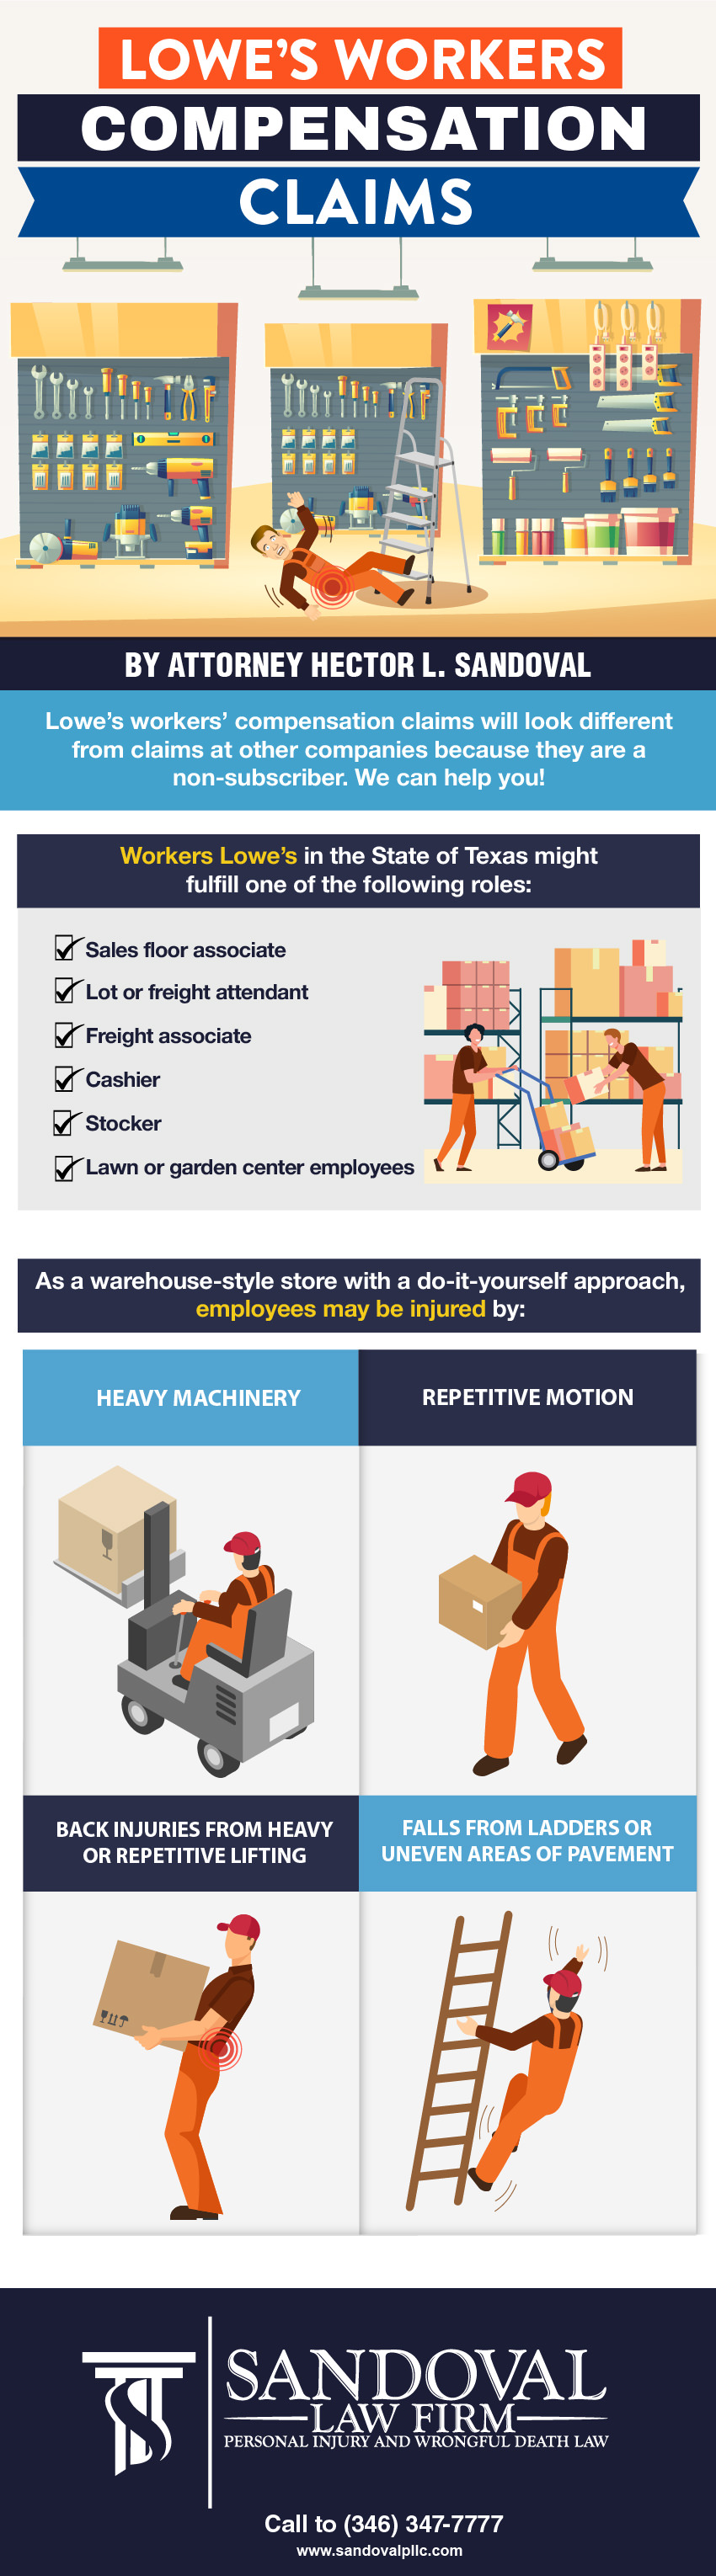 Infographic - Lowe’s Workers Compensation Claims - Sandoval